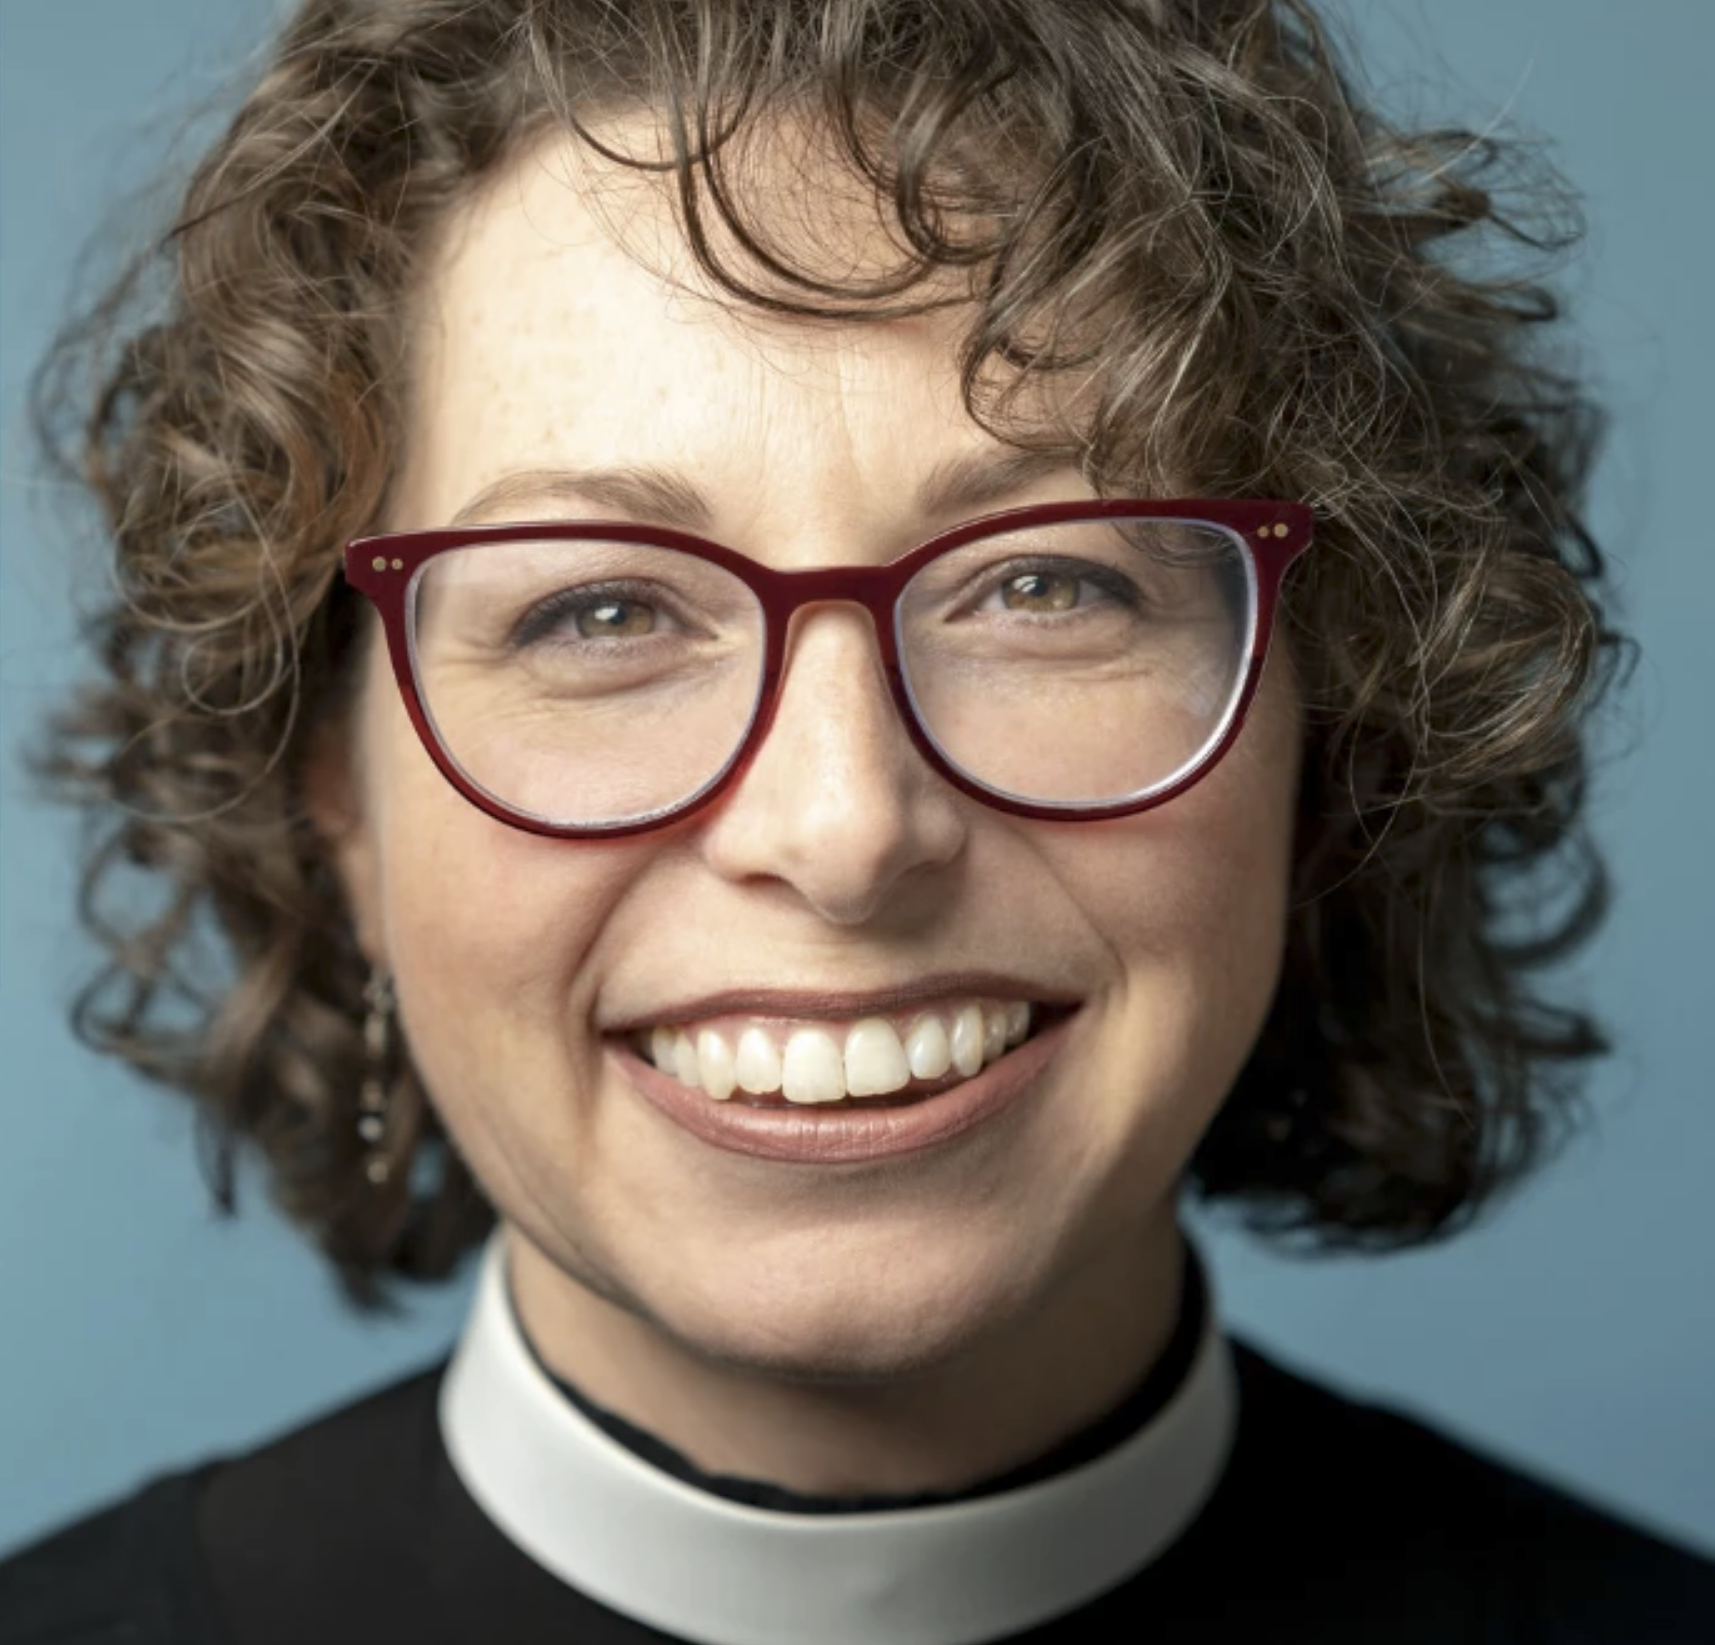 The Rev. Mary Vano: Come to Love Your God, Stay to Love Your Neighbor